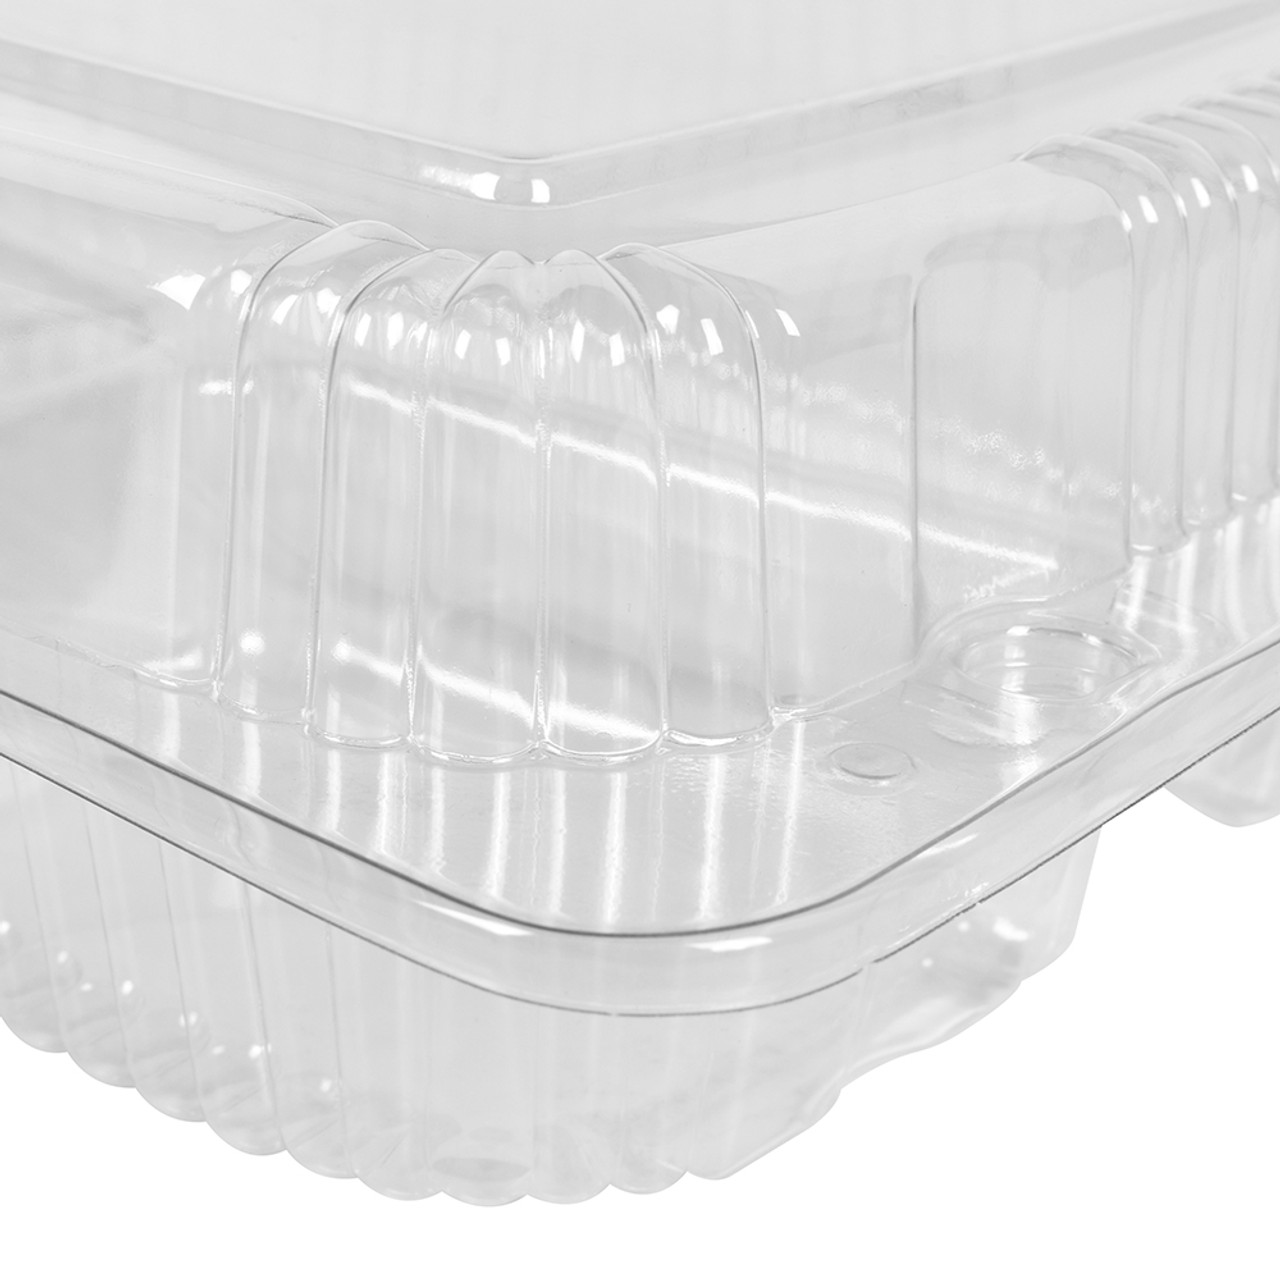 Sugarfiber™ 10x10 inch 3 Compartment Square Hinged Container